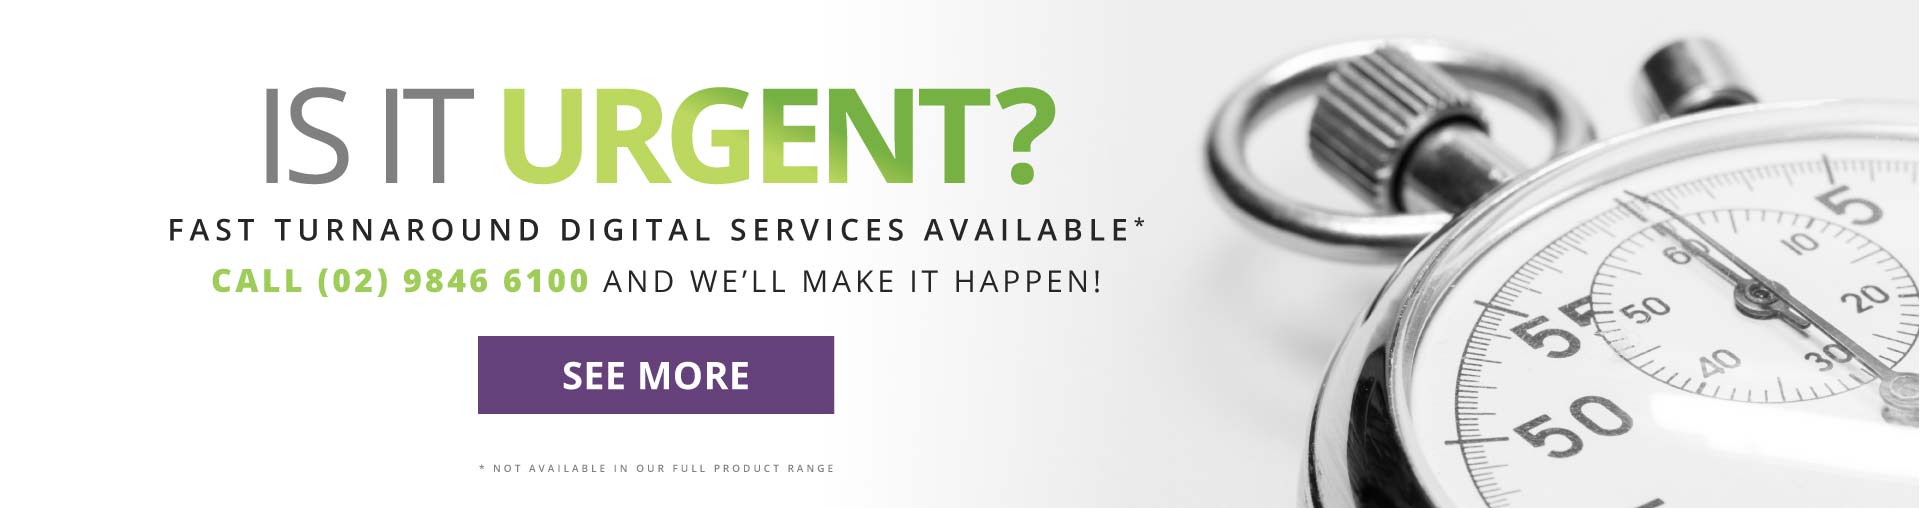 Is it urgent? Fast turnaround digital services available* Call (02) 9846 6100 and we'll make it happen! // See more *Not available in our full product range